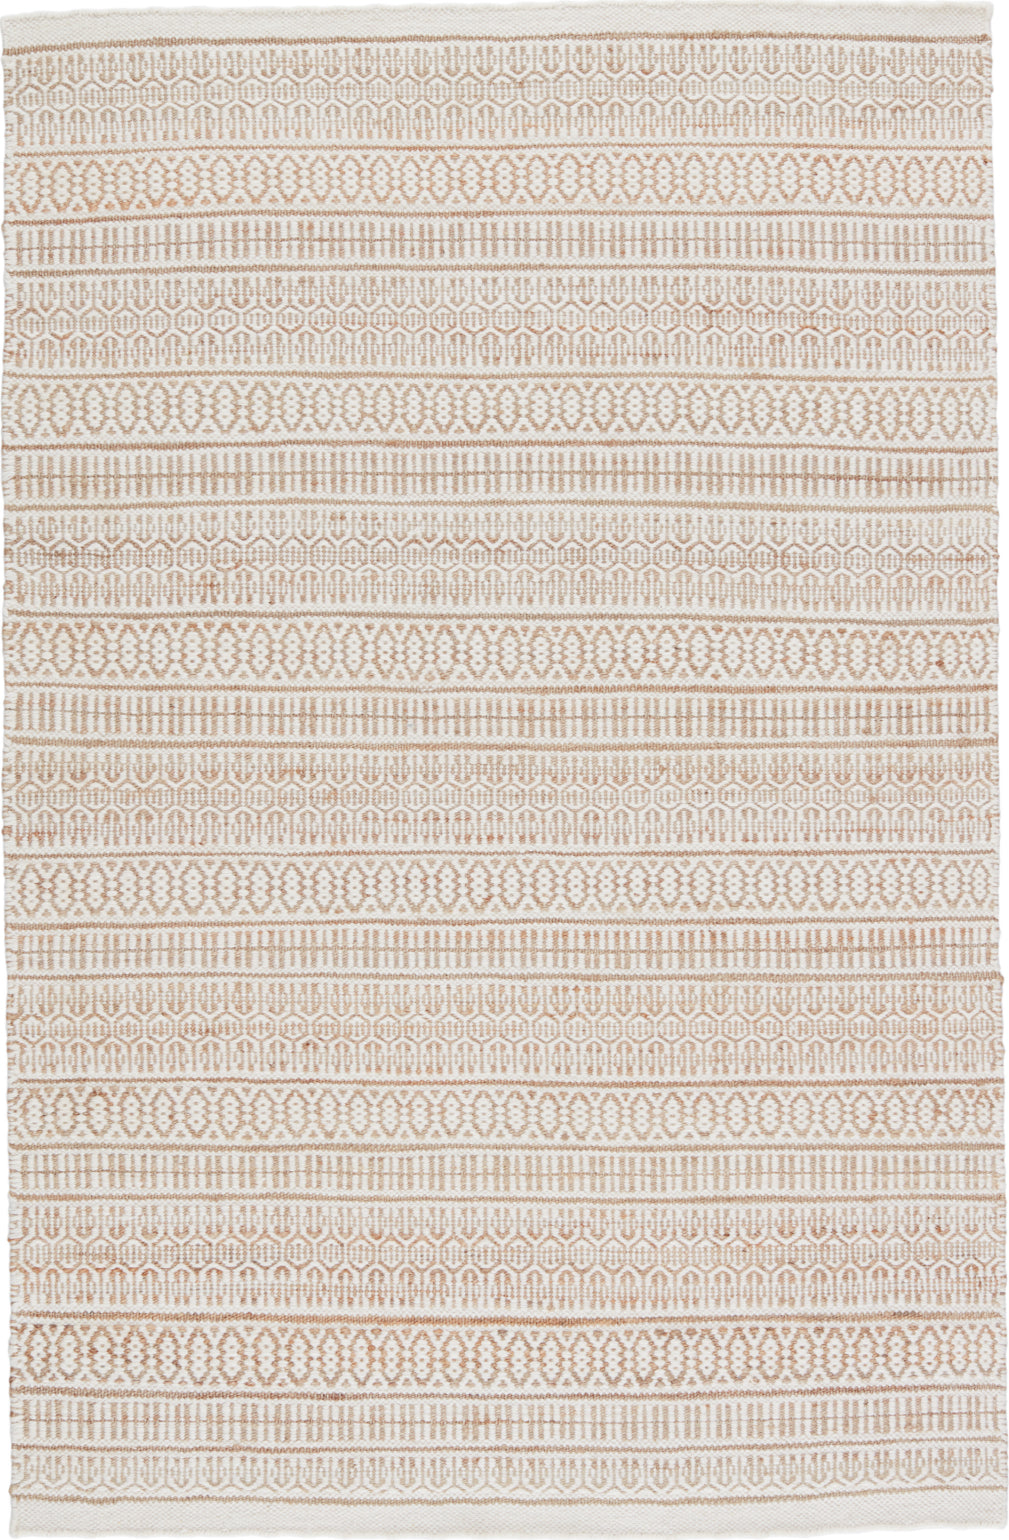 Jaipur Living Fontaine Galway FNT01 Beige/Ivory Area Rug Main Image